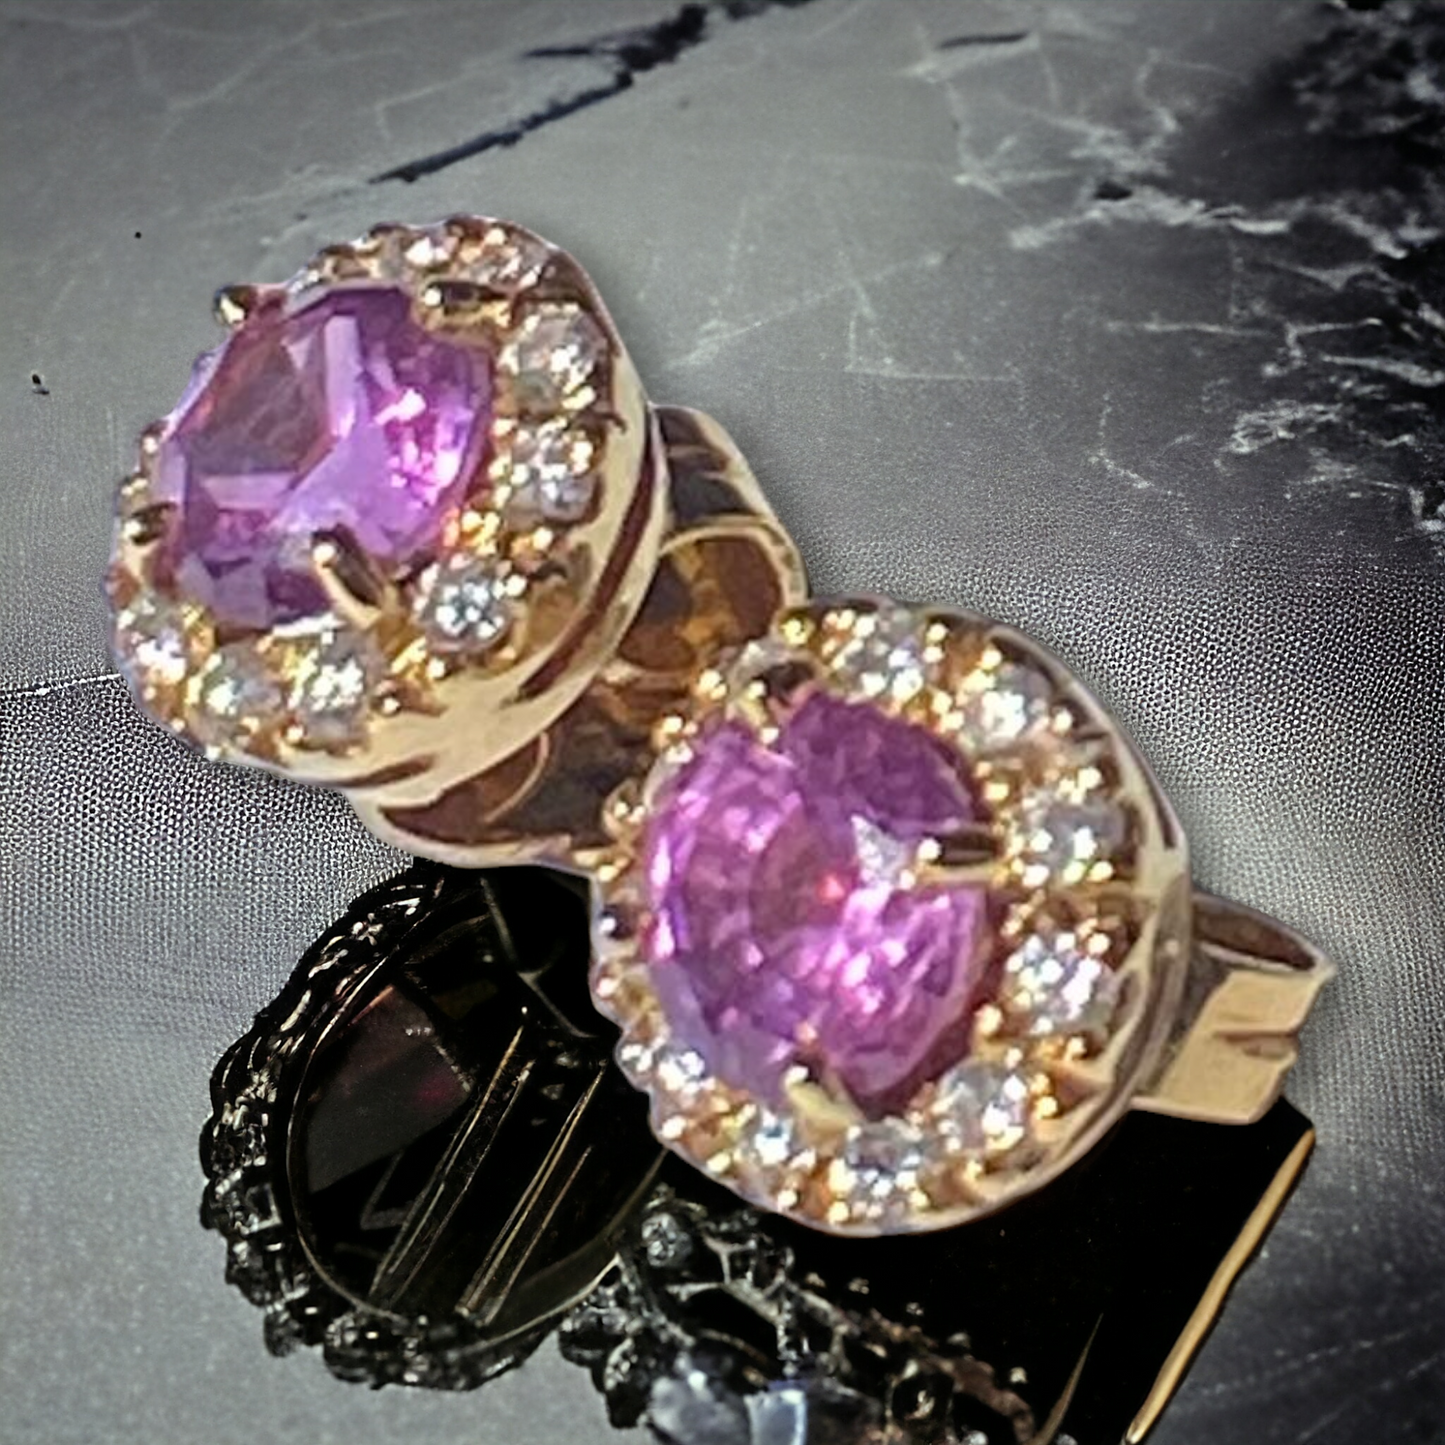 Handmade 18K yellow gold earrings with 1.33 ct. natural pink Sapphires, natural Vvs1 high quality Diamonds.